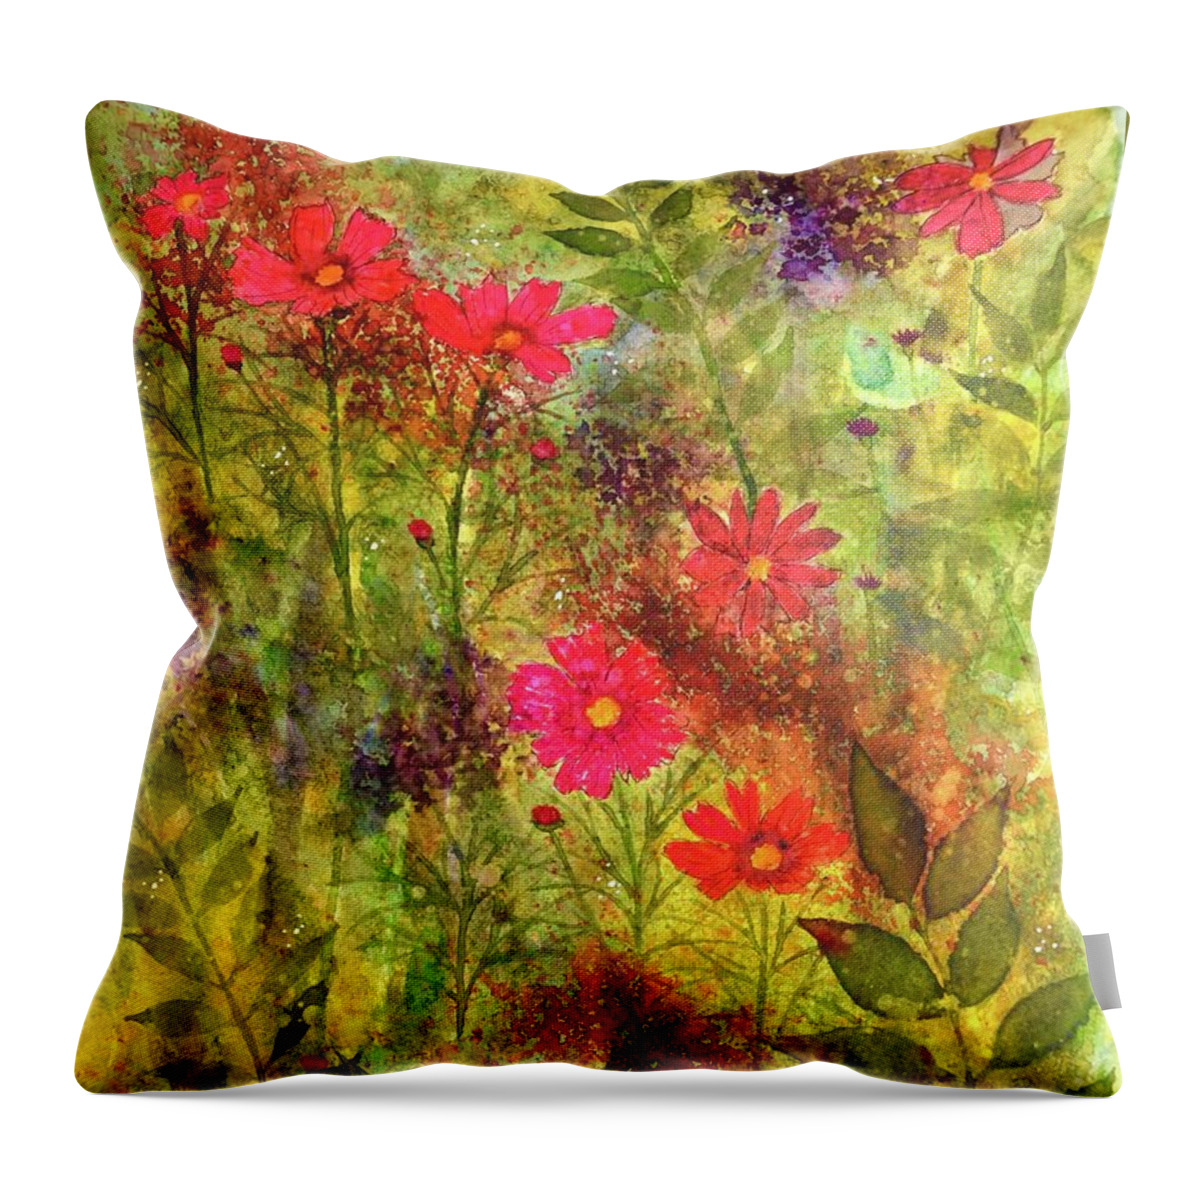 Barrieloustark Throw Pillow featuring the painting #676 Garden Tangle #676 by Barrie Stark